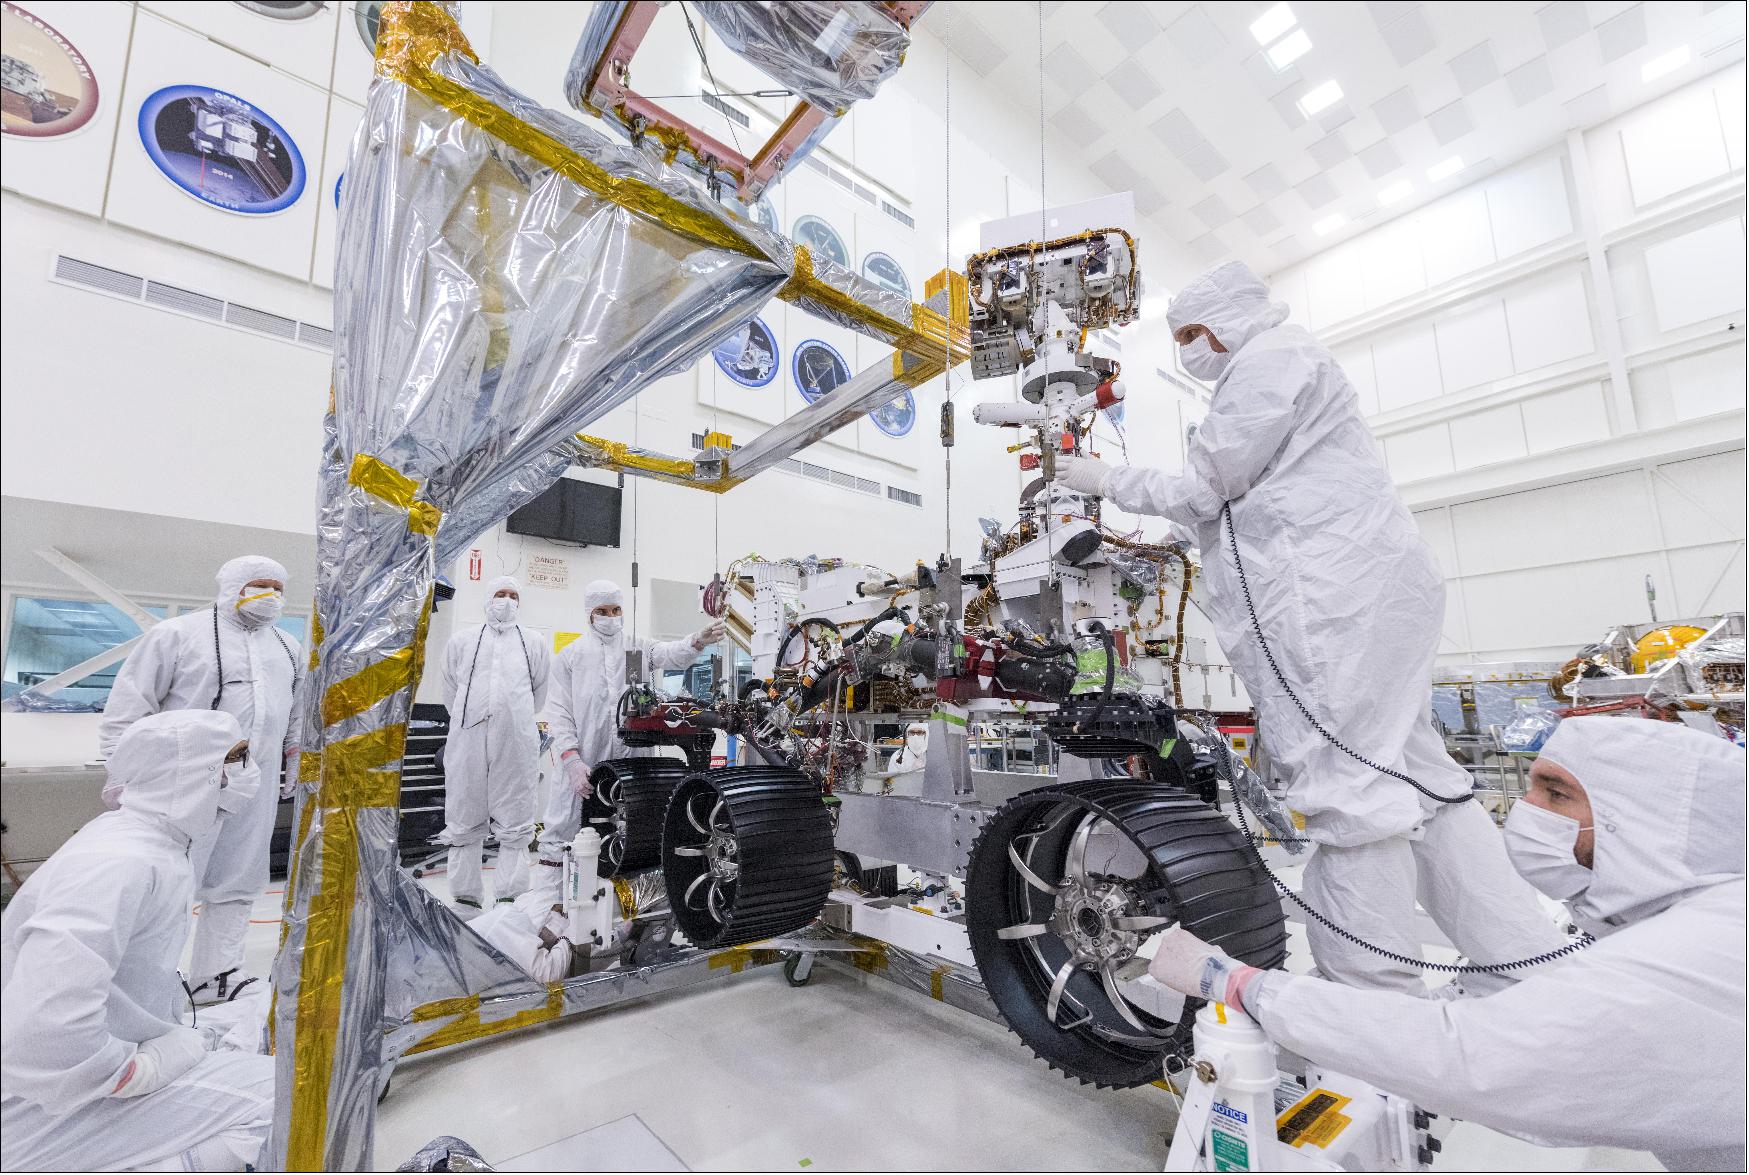 Figure 7: In this image, taken on June 13, 2019, engineers at JPL install the starboard legs and wheels - otherwise known as the mobility suspension - on the Mars 2020 rover (image credit: NASA/JPL-Caltech)